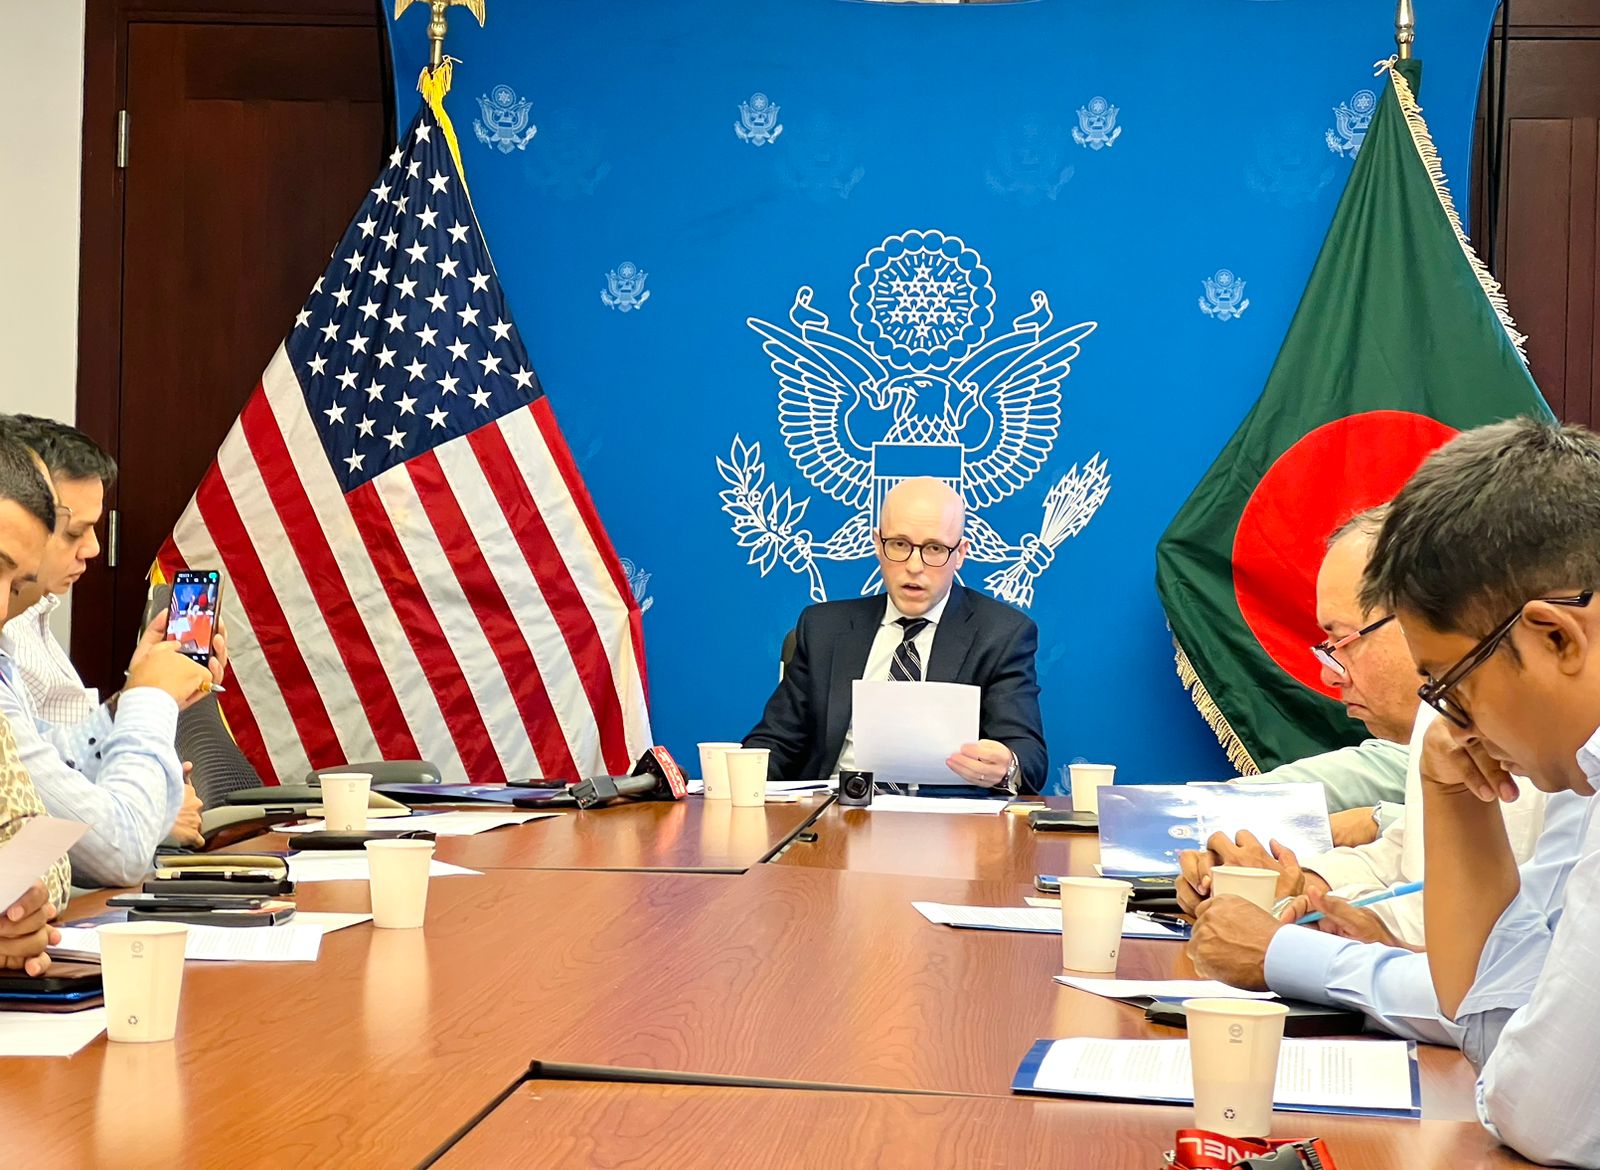 US wants Bangladesh to become a ‘net security provider’ in Indo Pacific region: Expert